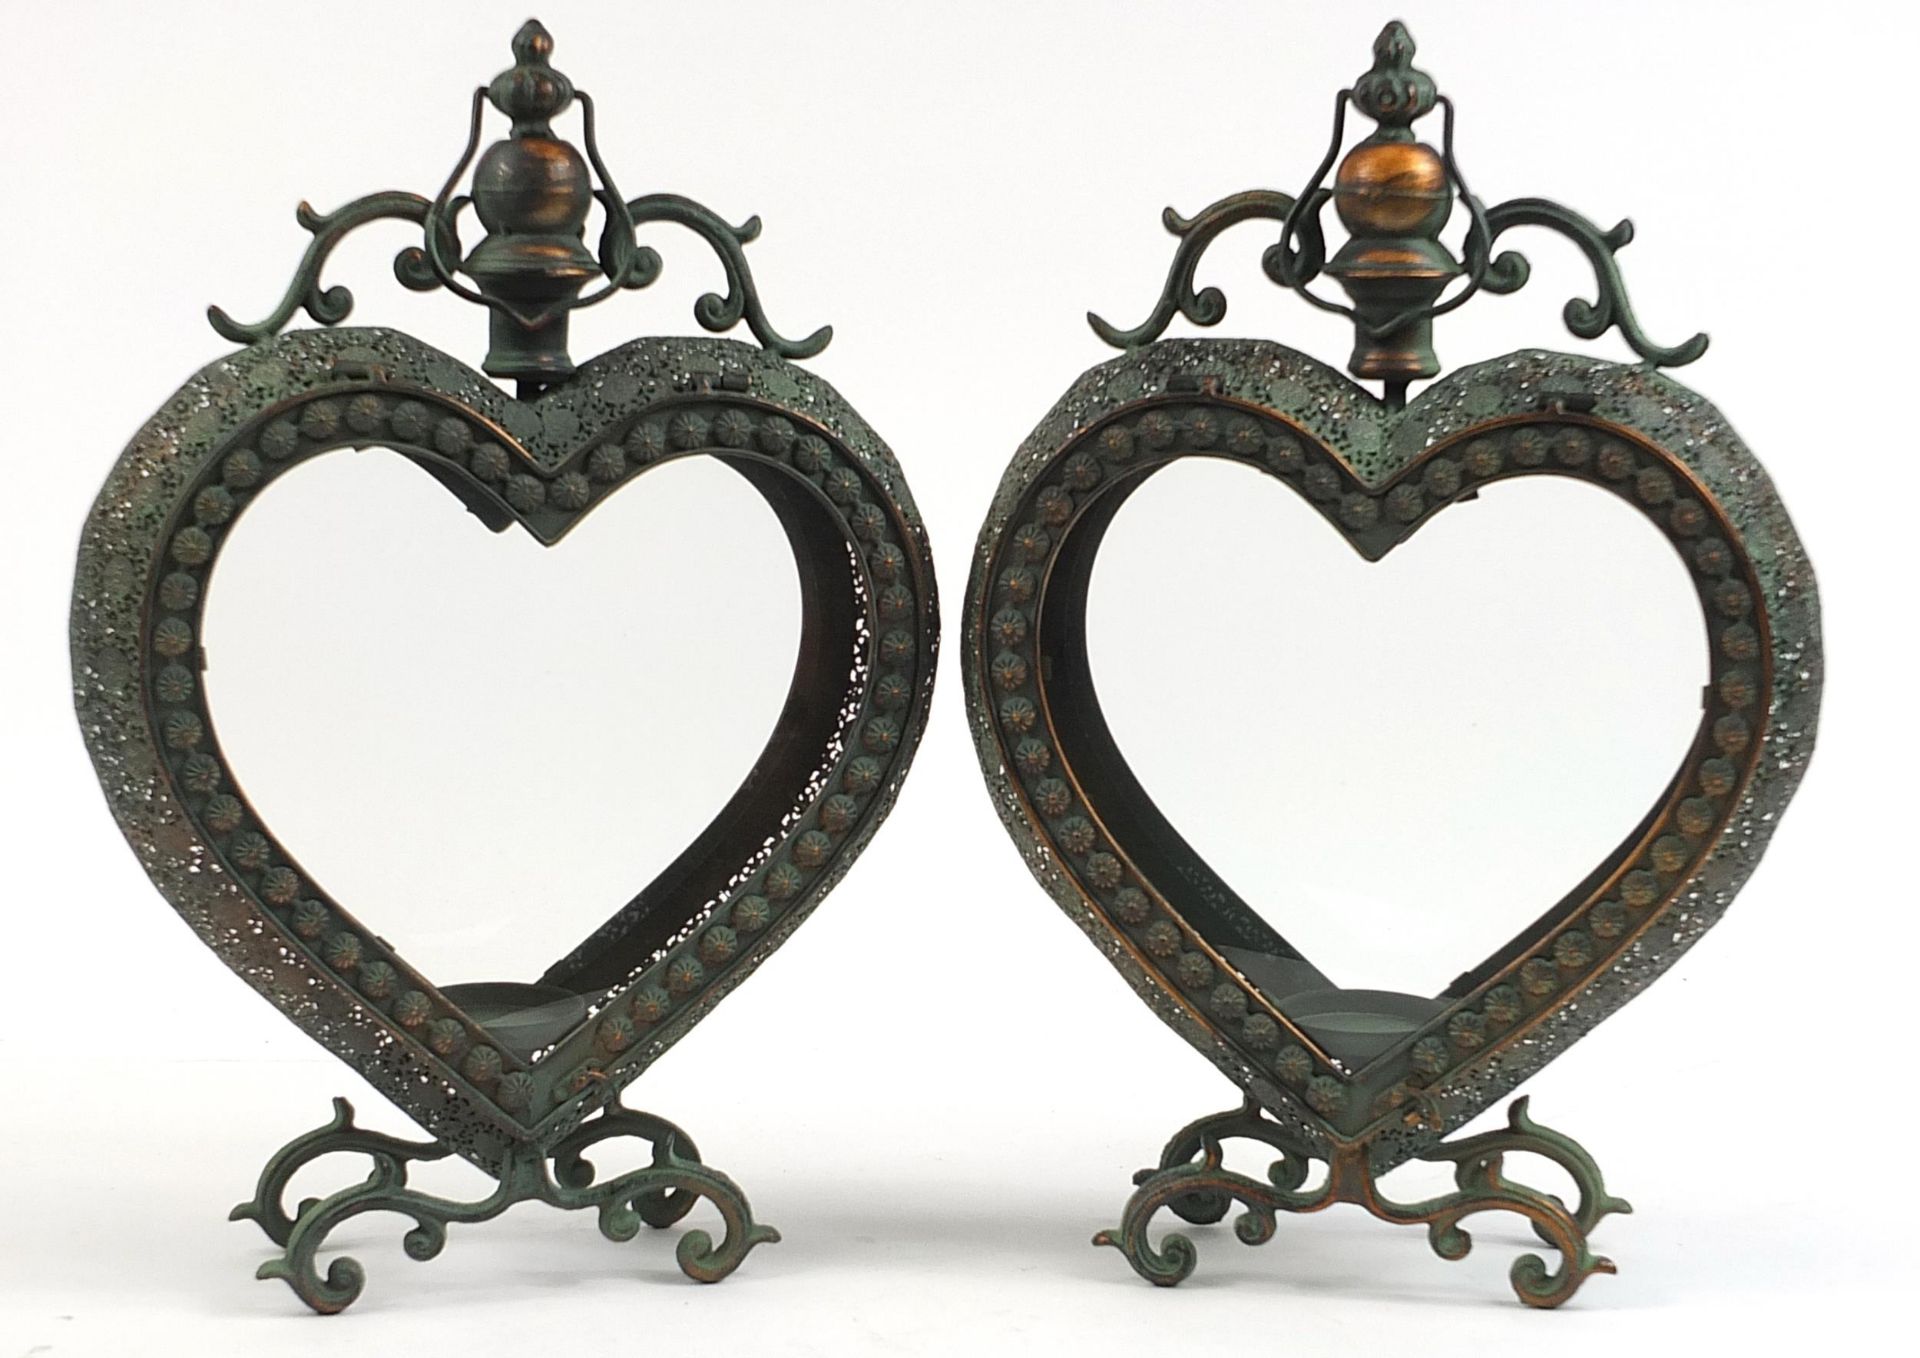 Pair of ornate bronzed metal love heart candle holders with glass panels, 53cm high - Image 2 of 2